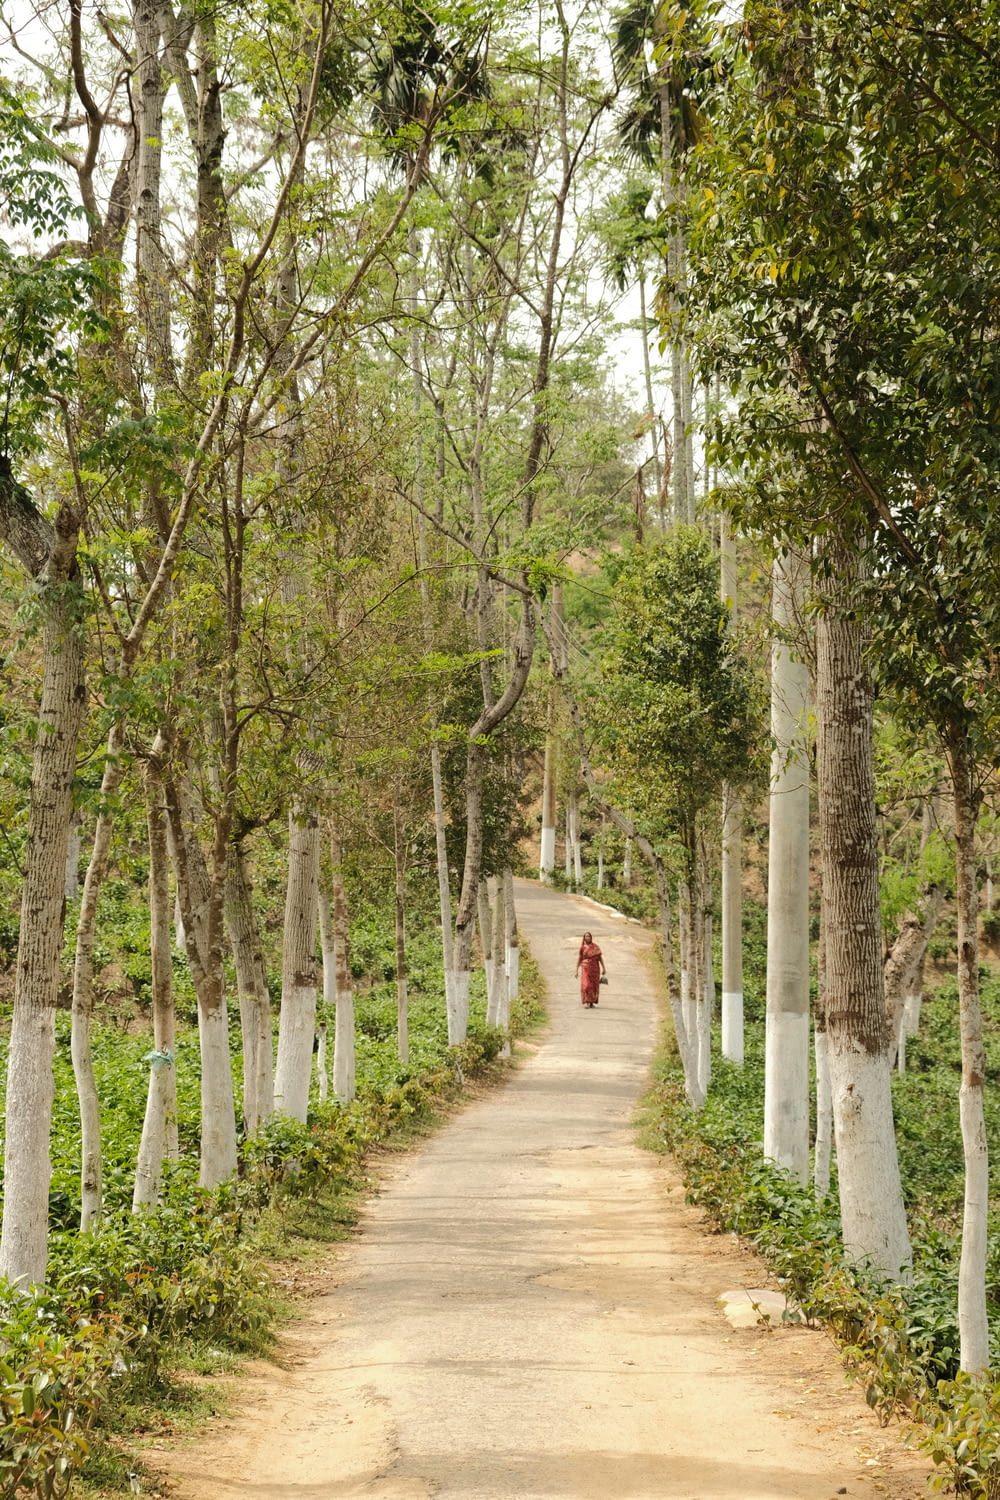 a person walking down a dirt road in the middle of a forest